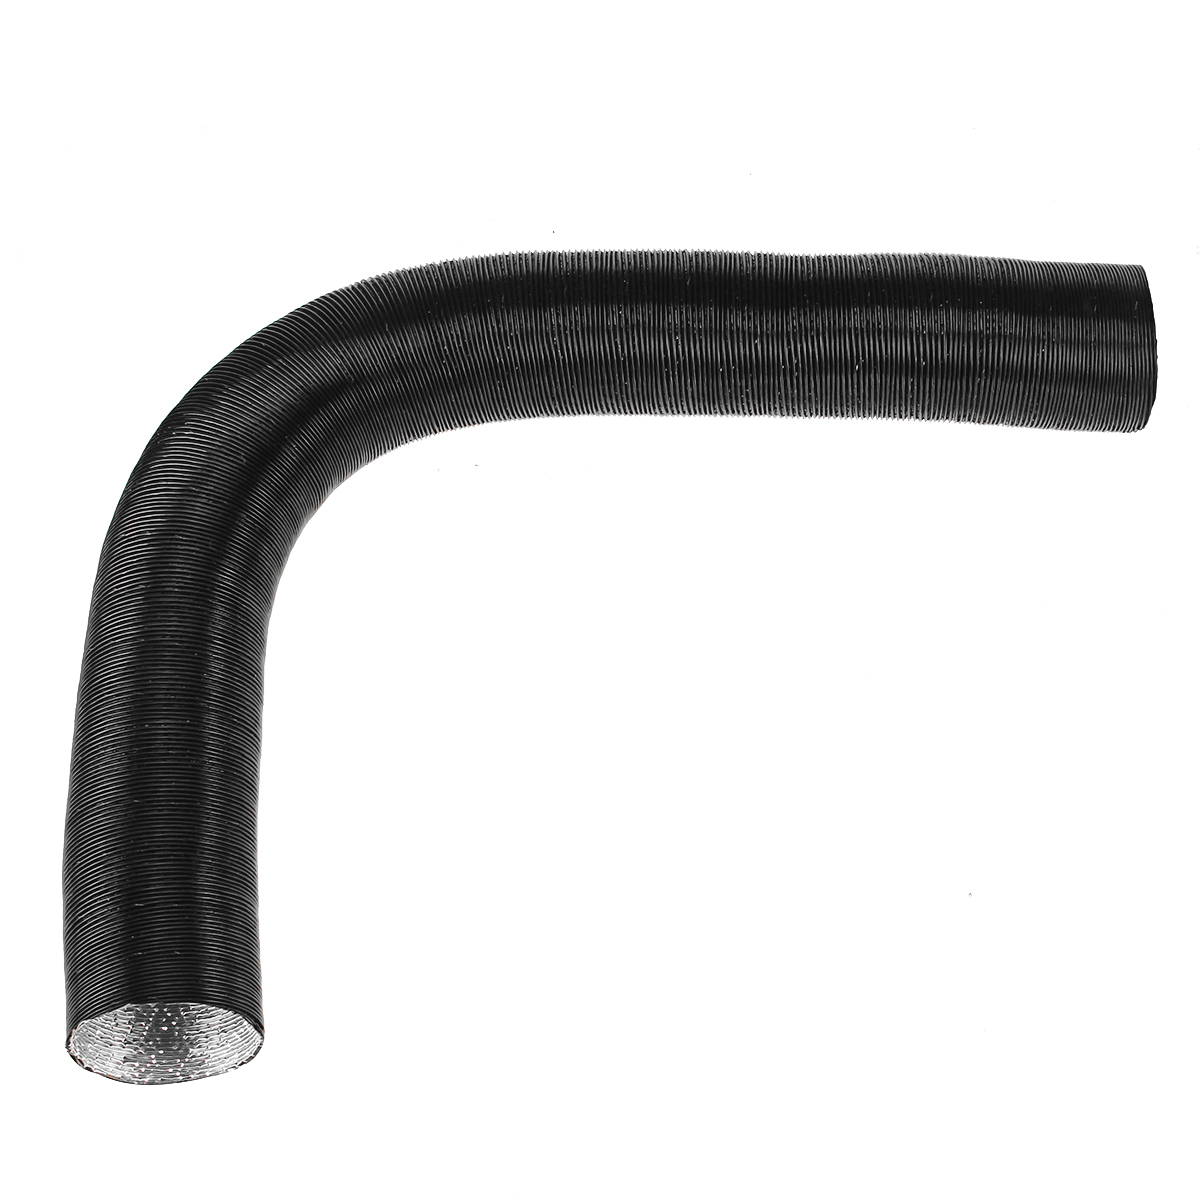 75mm-Heater-Pipe-Duct--Warm-Air-Outlet--Y-Branch--Hose-Clip-For-Parking-Diesel-Heater-1465416-5